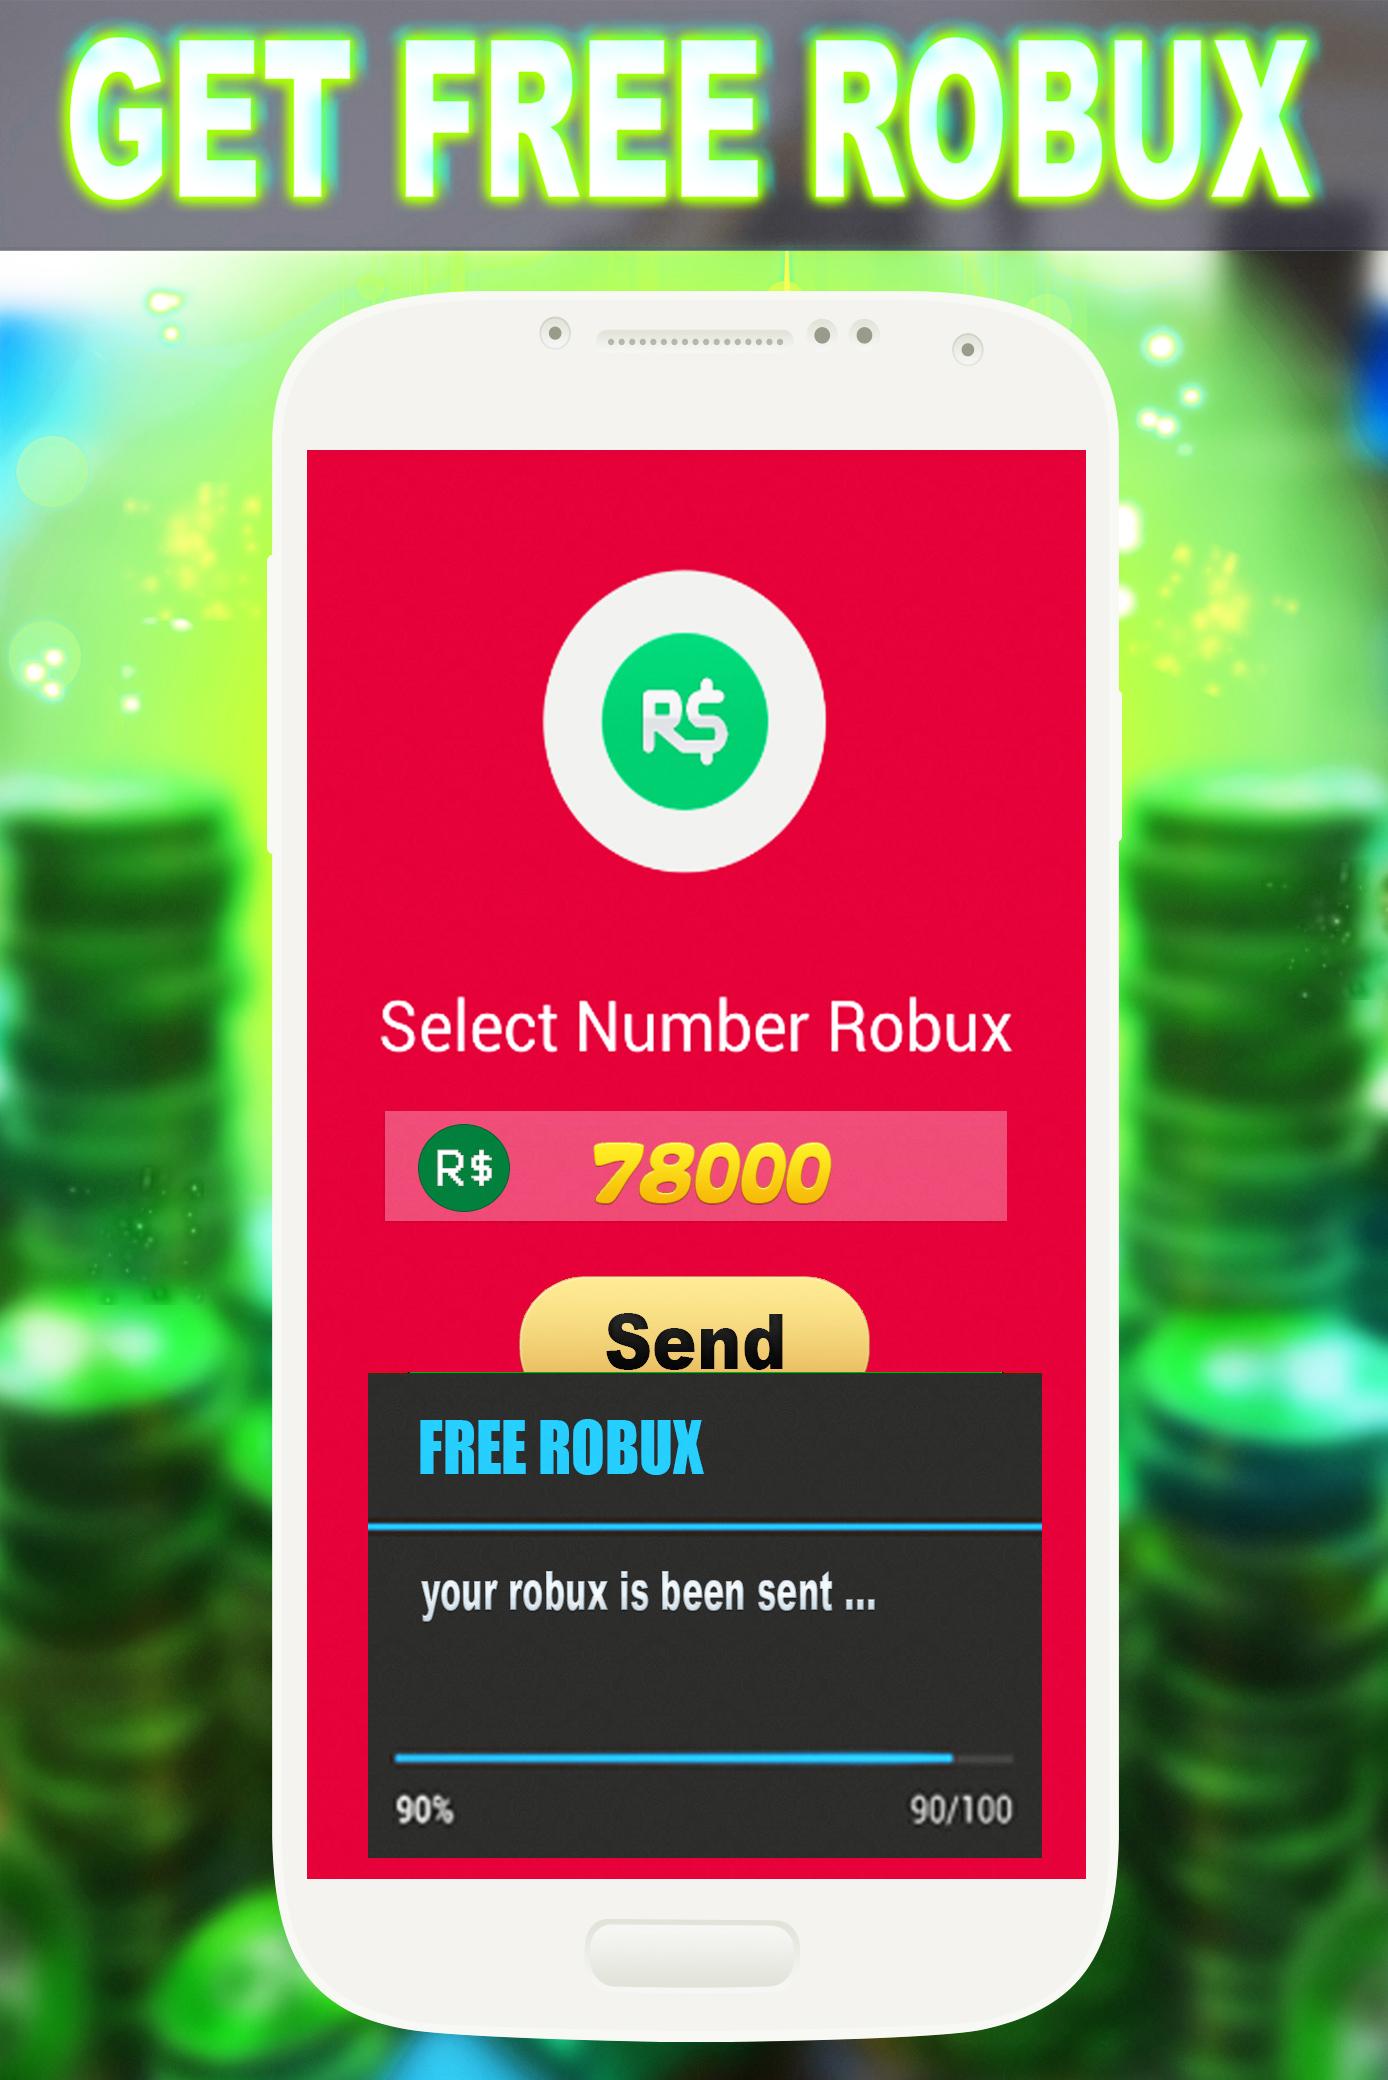 Free Robux for Android - APK Download - 